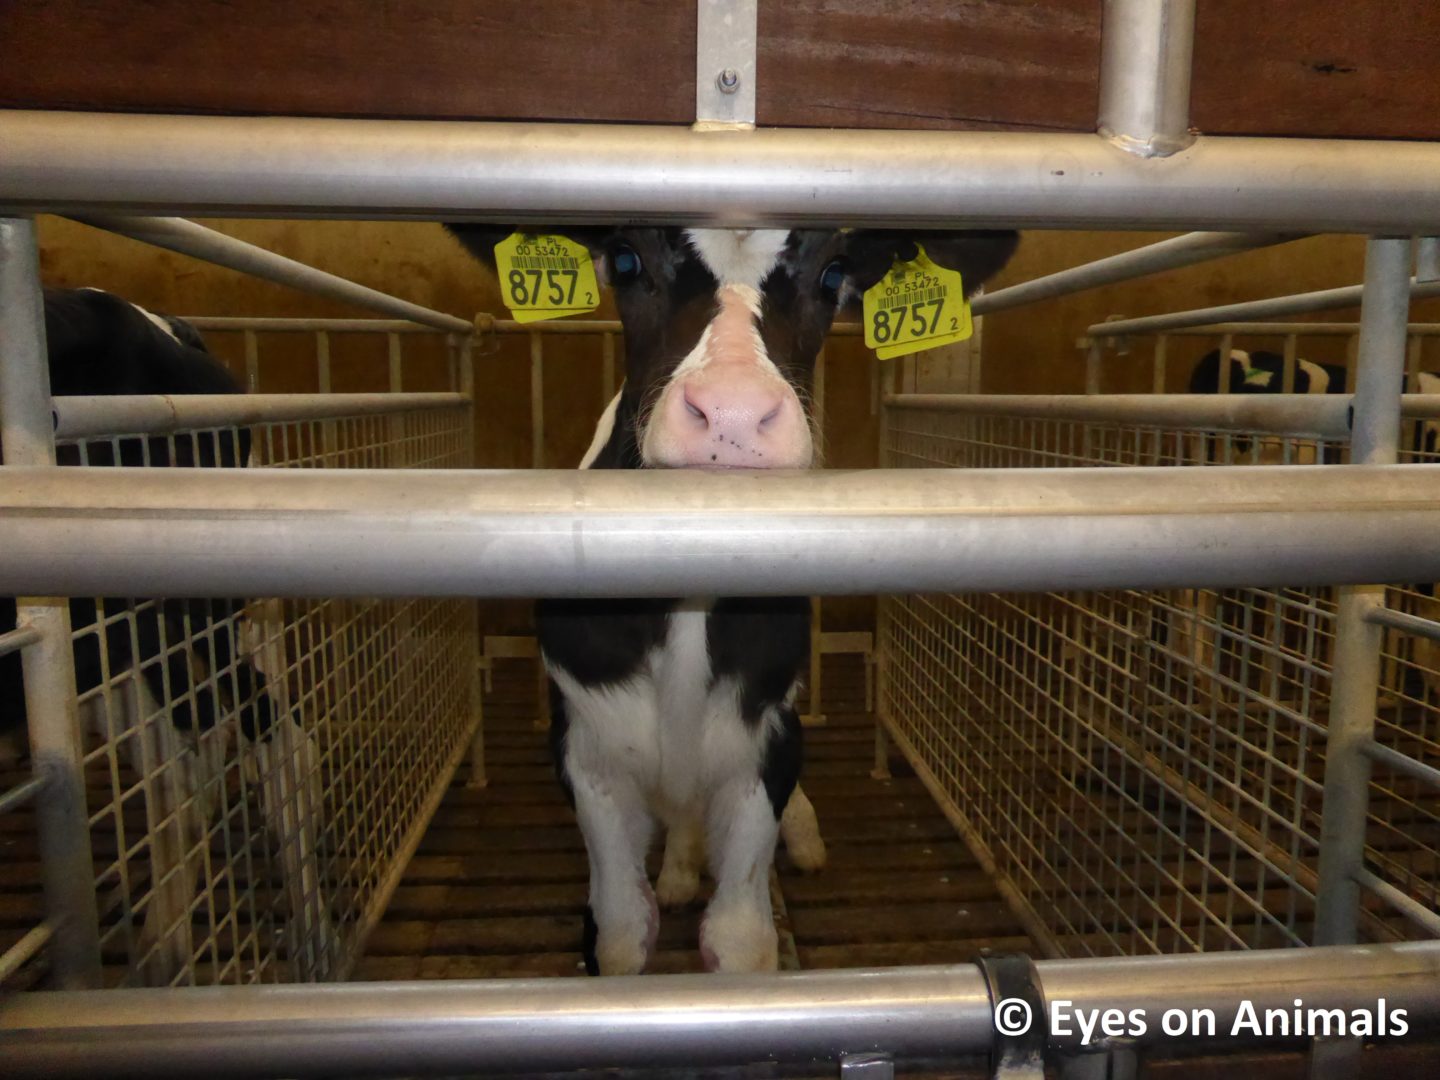 Revealed: the suffering faced by Scotland's farm animals during live transport 8